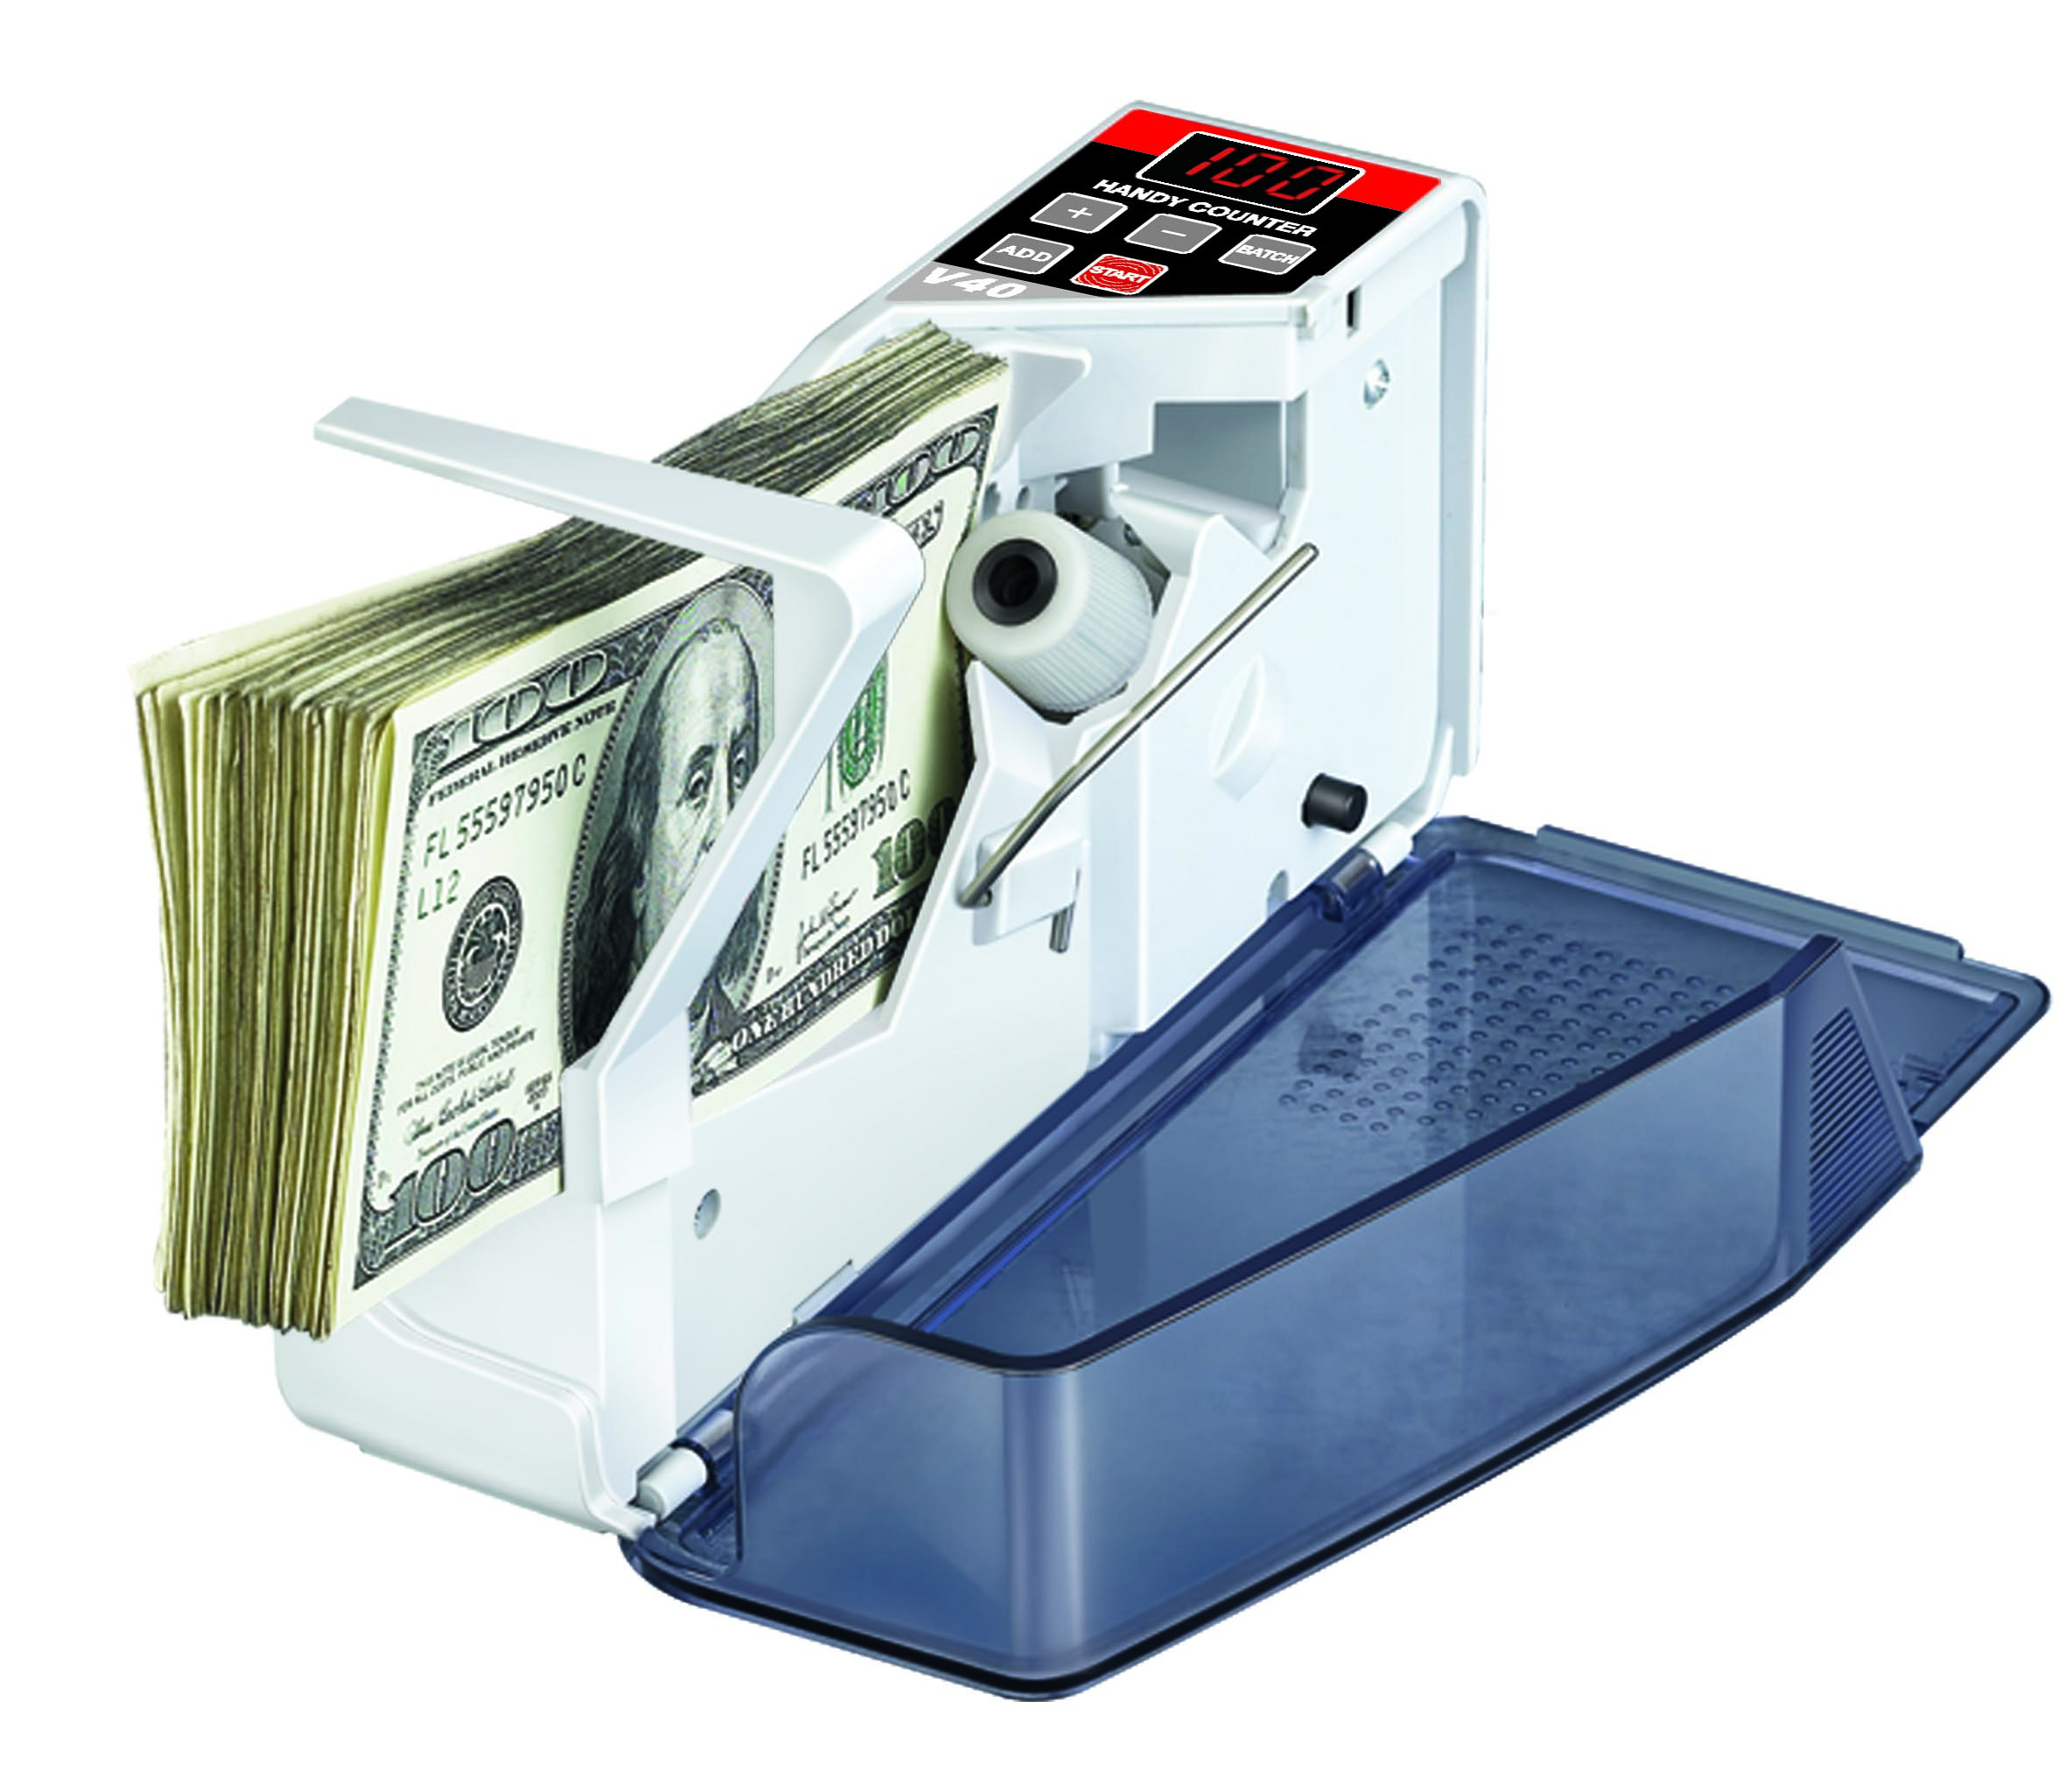 Portable Banknote Counter V40 Cash Counter Automatic Counting Machine